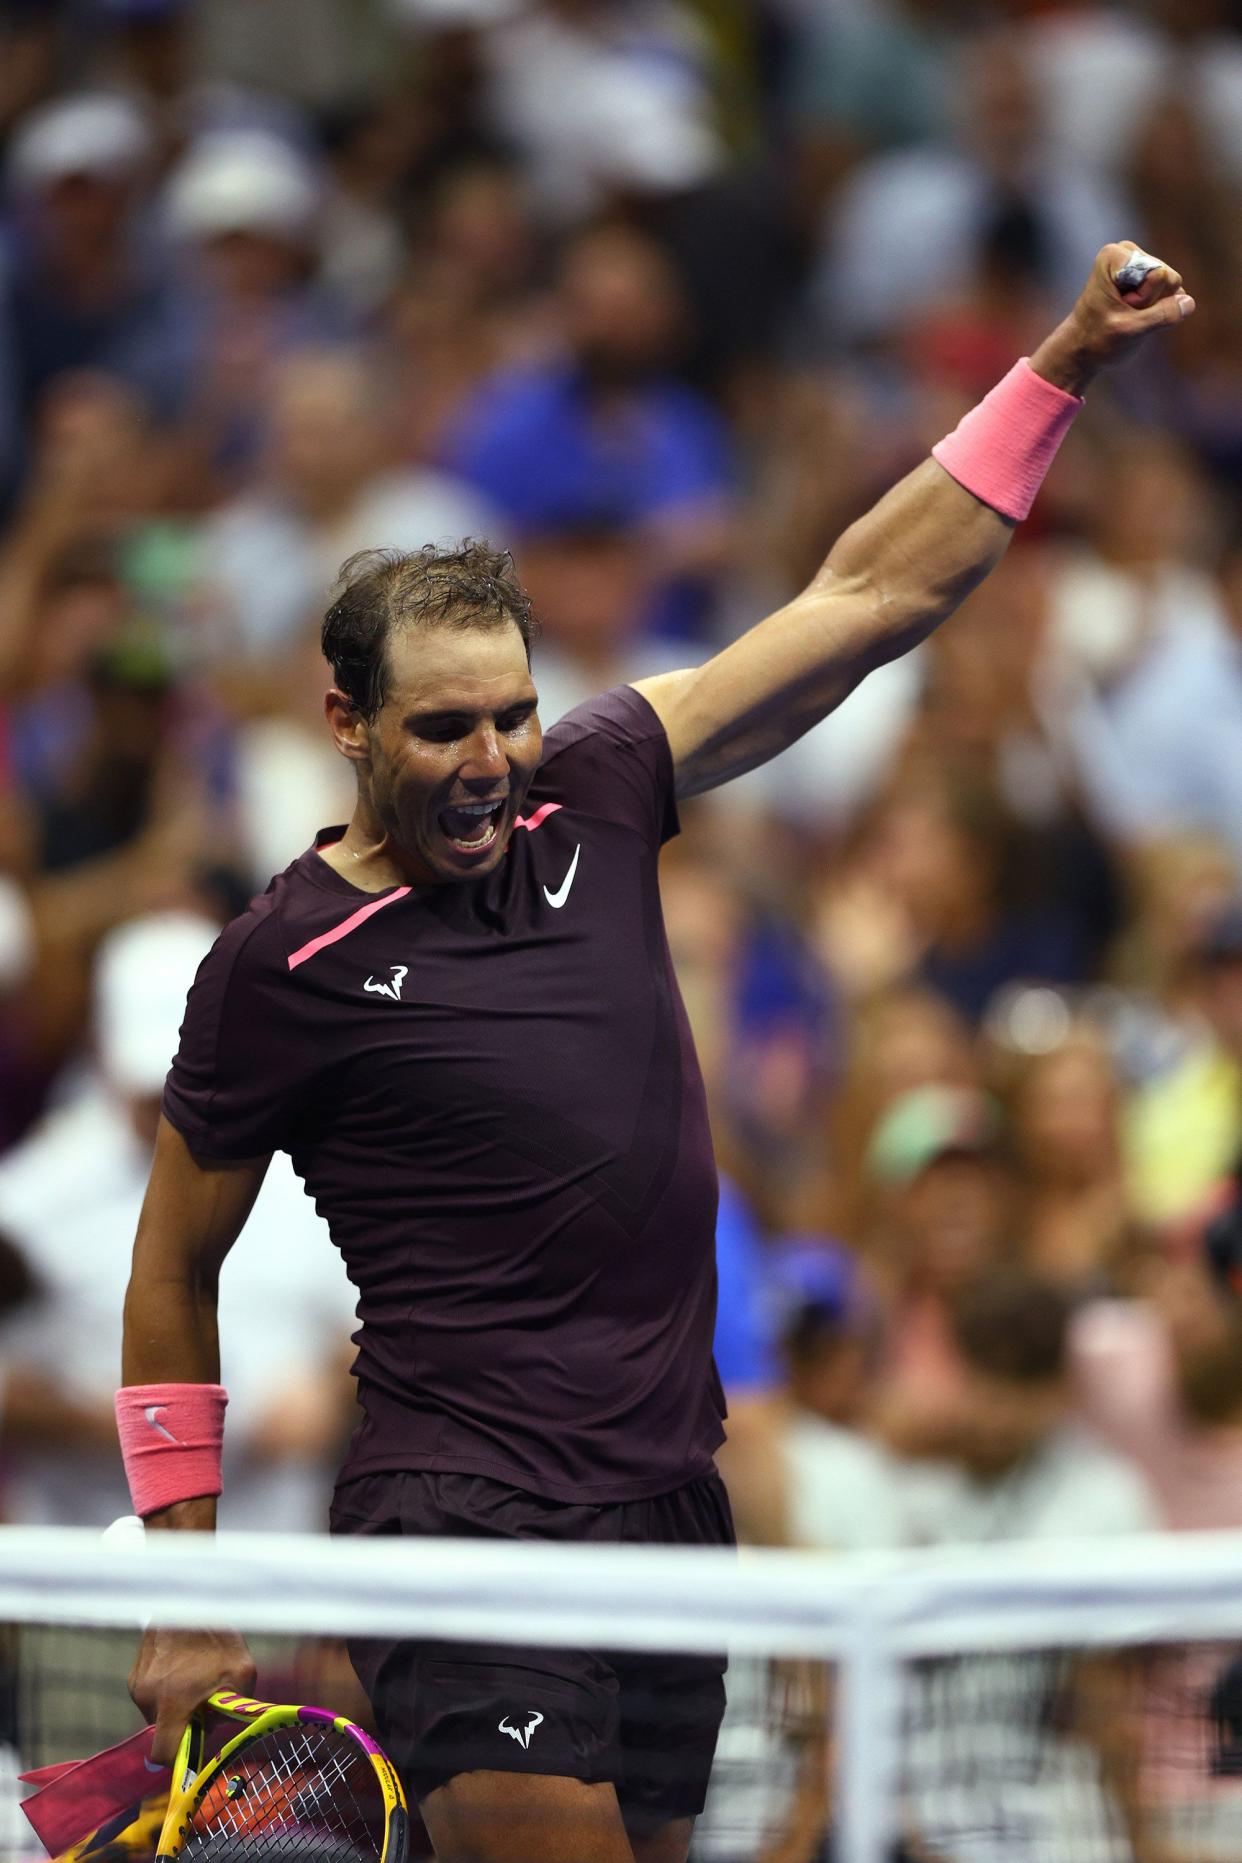 Rafael Nadal of Spain celebrates after defeating Rinky Hijikata of Australia in their Men's Singles First Round match on Day Two of the 2022 U.S. Open at USTA Billie Jean King National Tennis Center on Aug. 30, 2022, in Flushing, Queens.